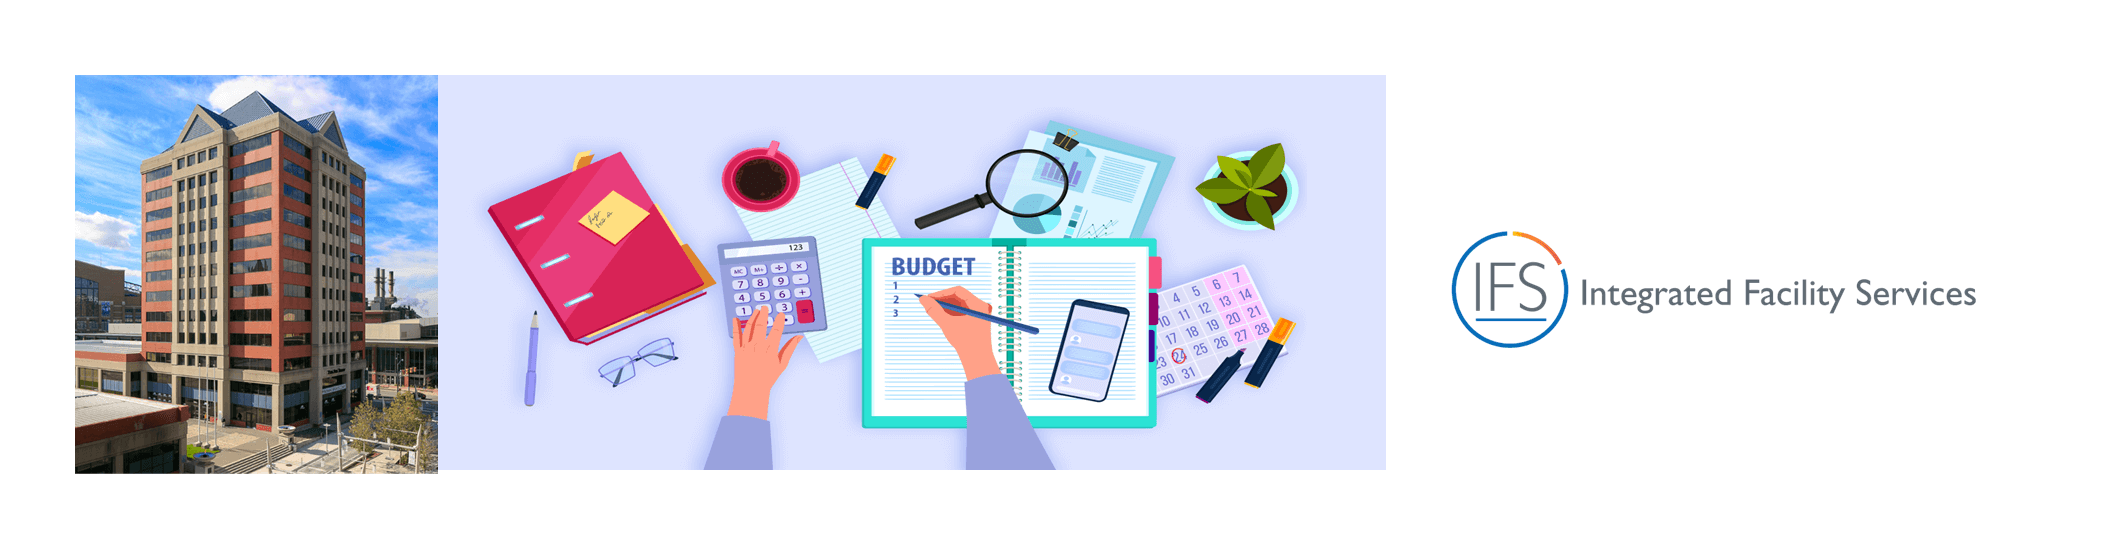 Commercial Property Management Budgeting